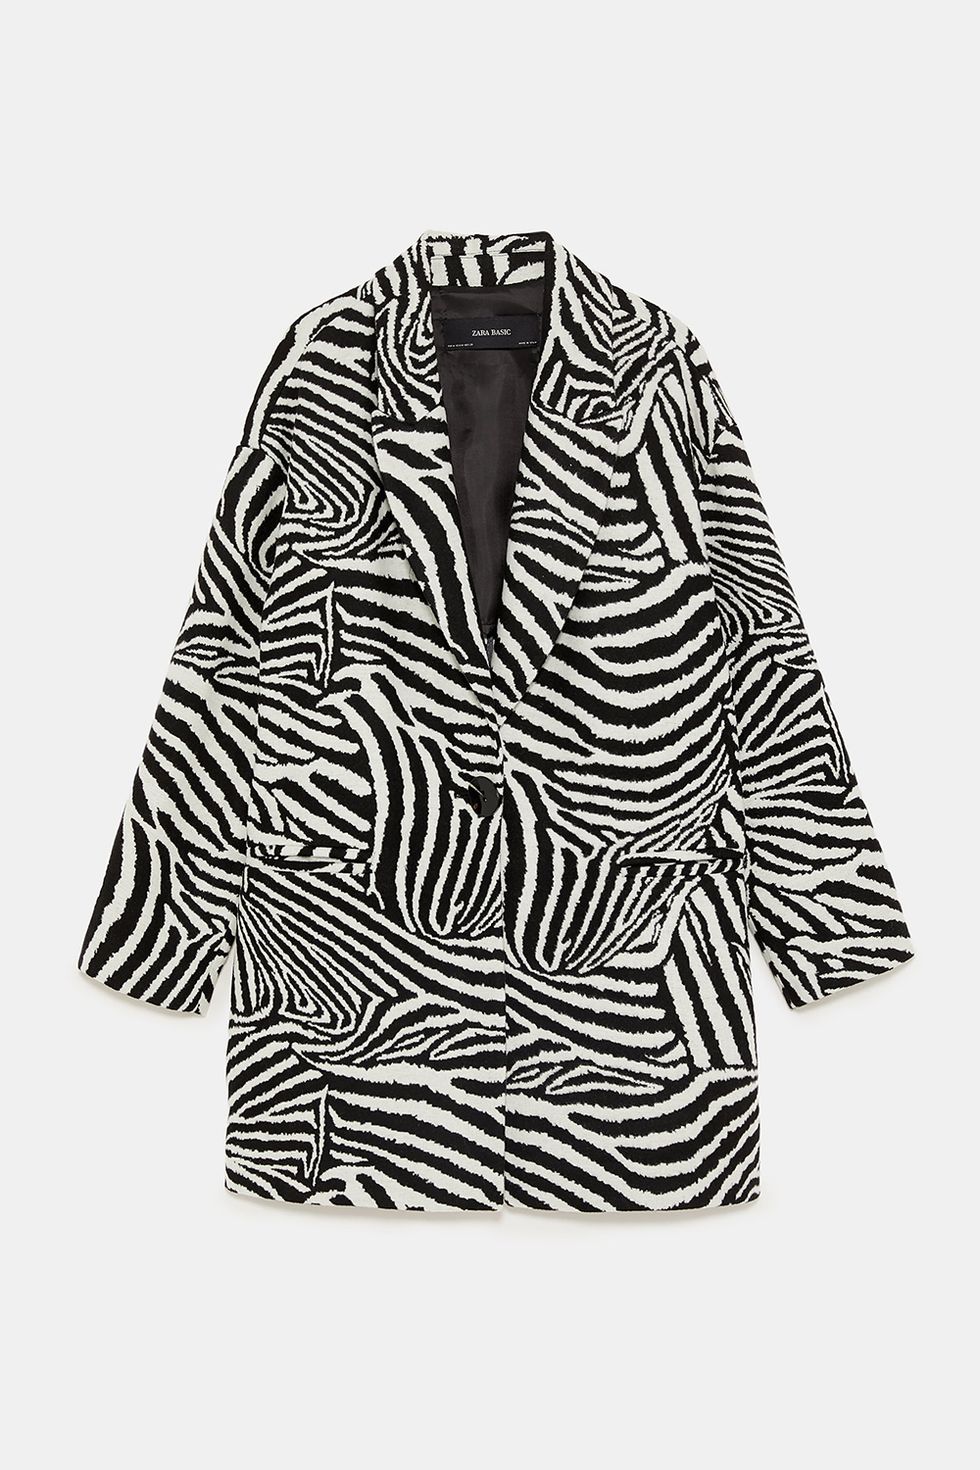 Clothing, Outerwear, Sleeve, Jacket, Blazer, Top, Black-and-white, T-shirt, Pattern, 